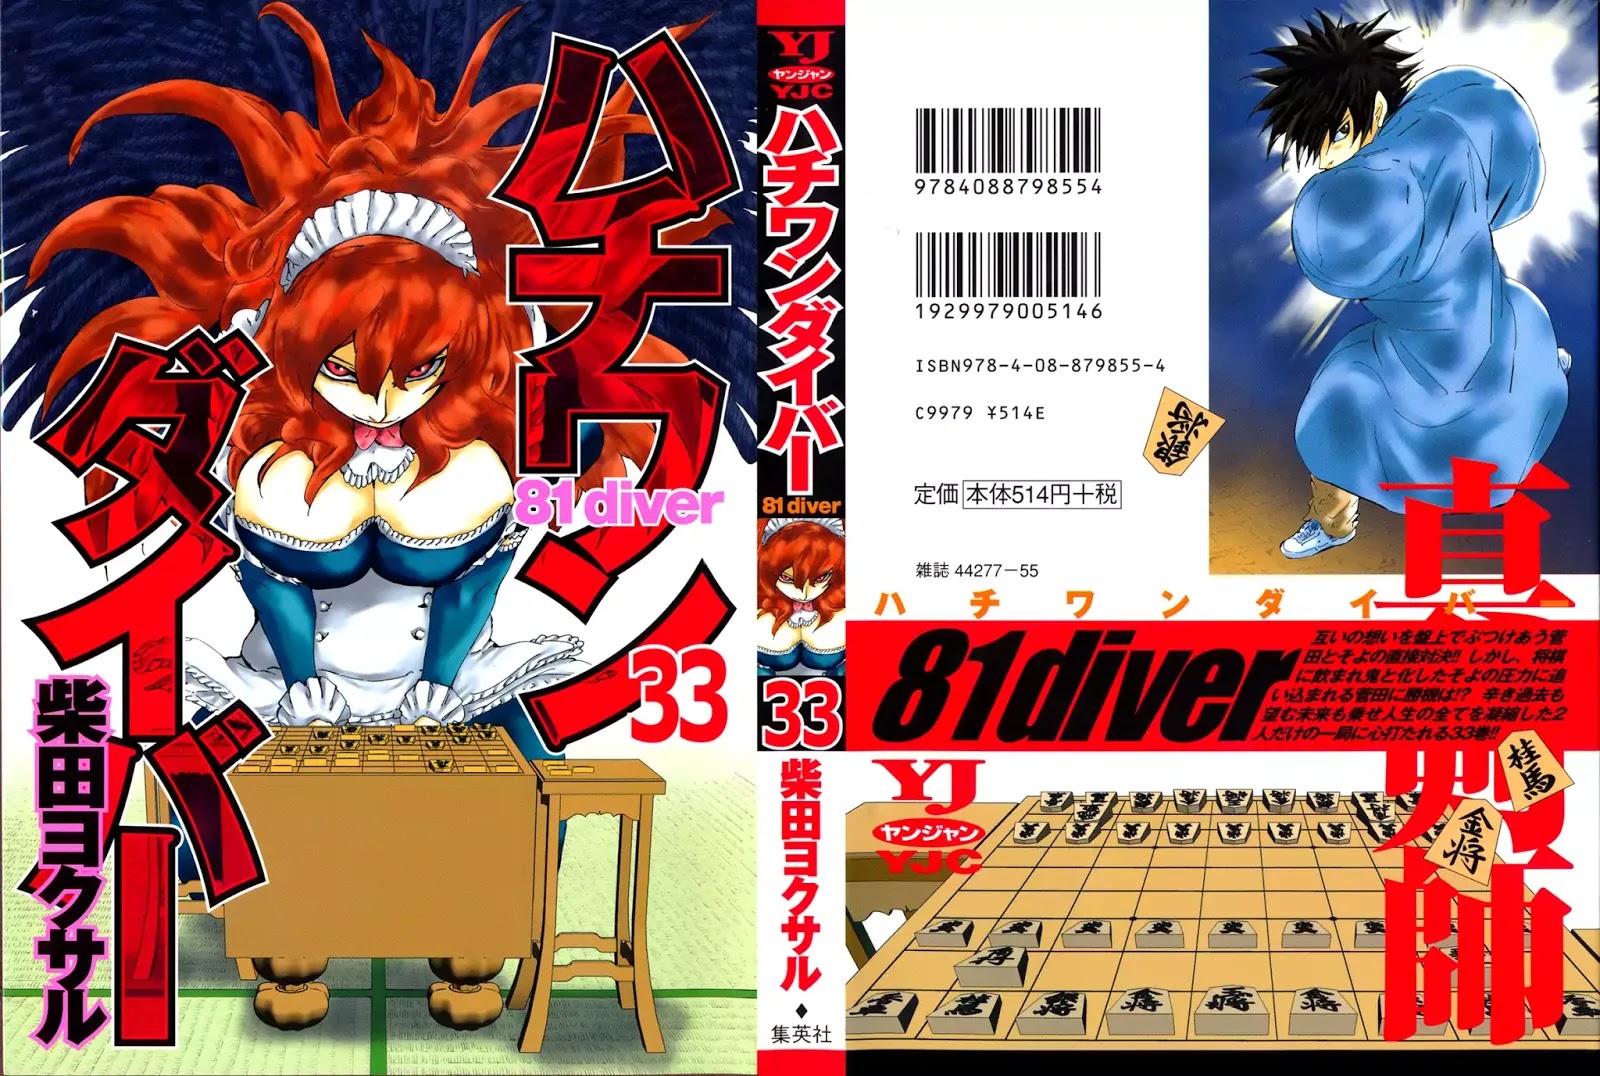 81 Diver Chapter 343 #1